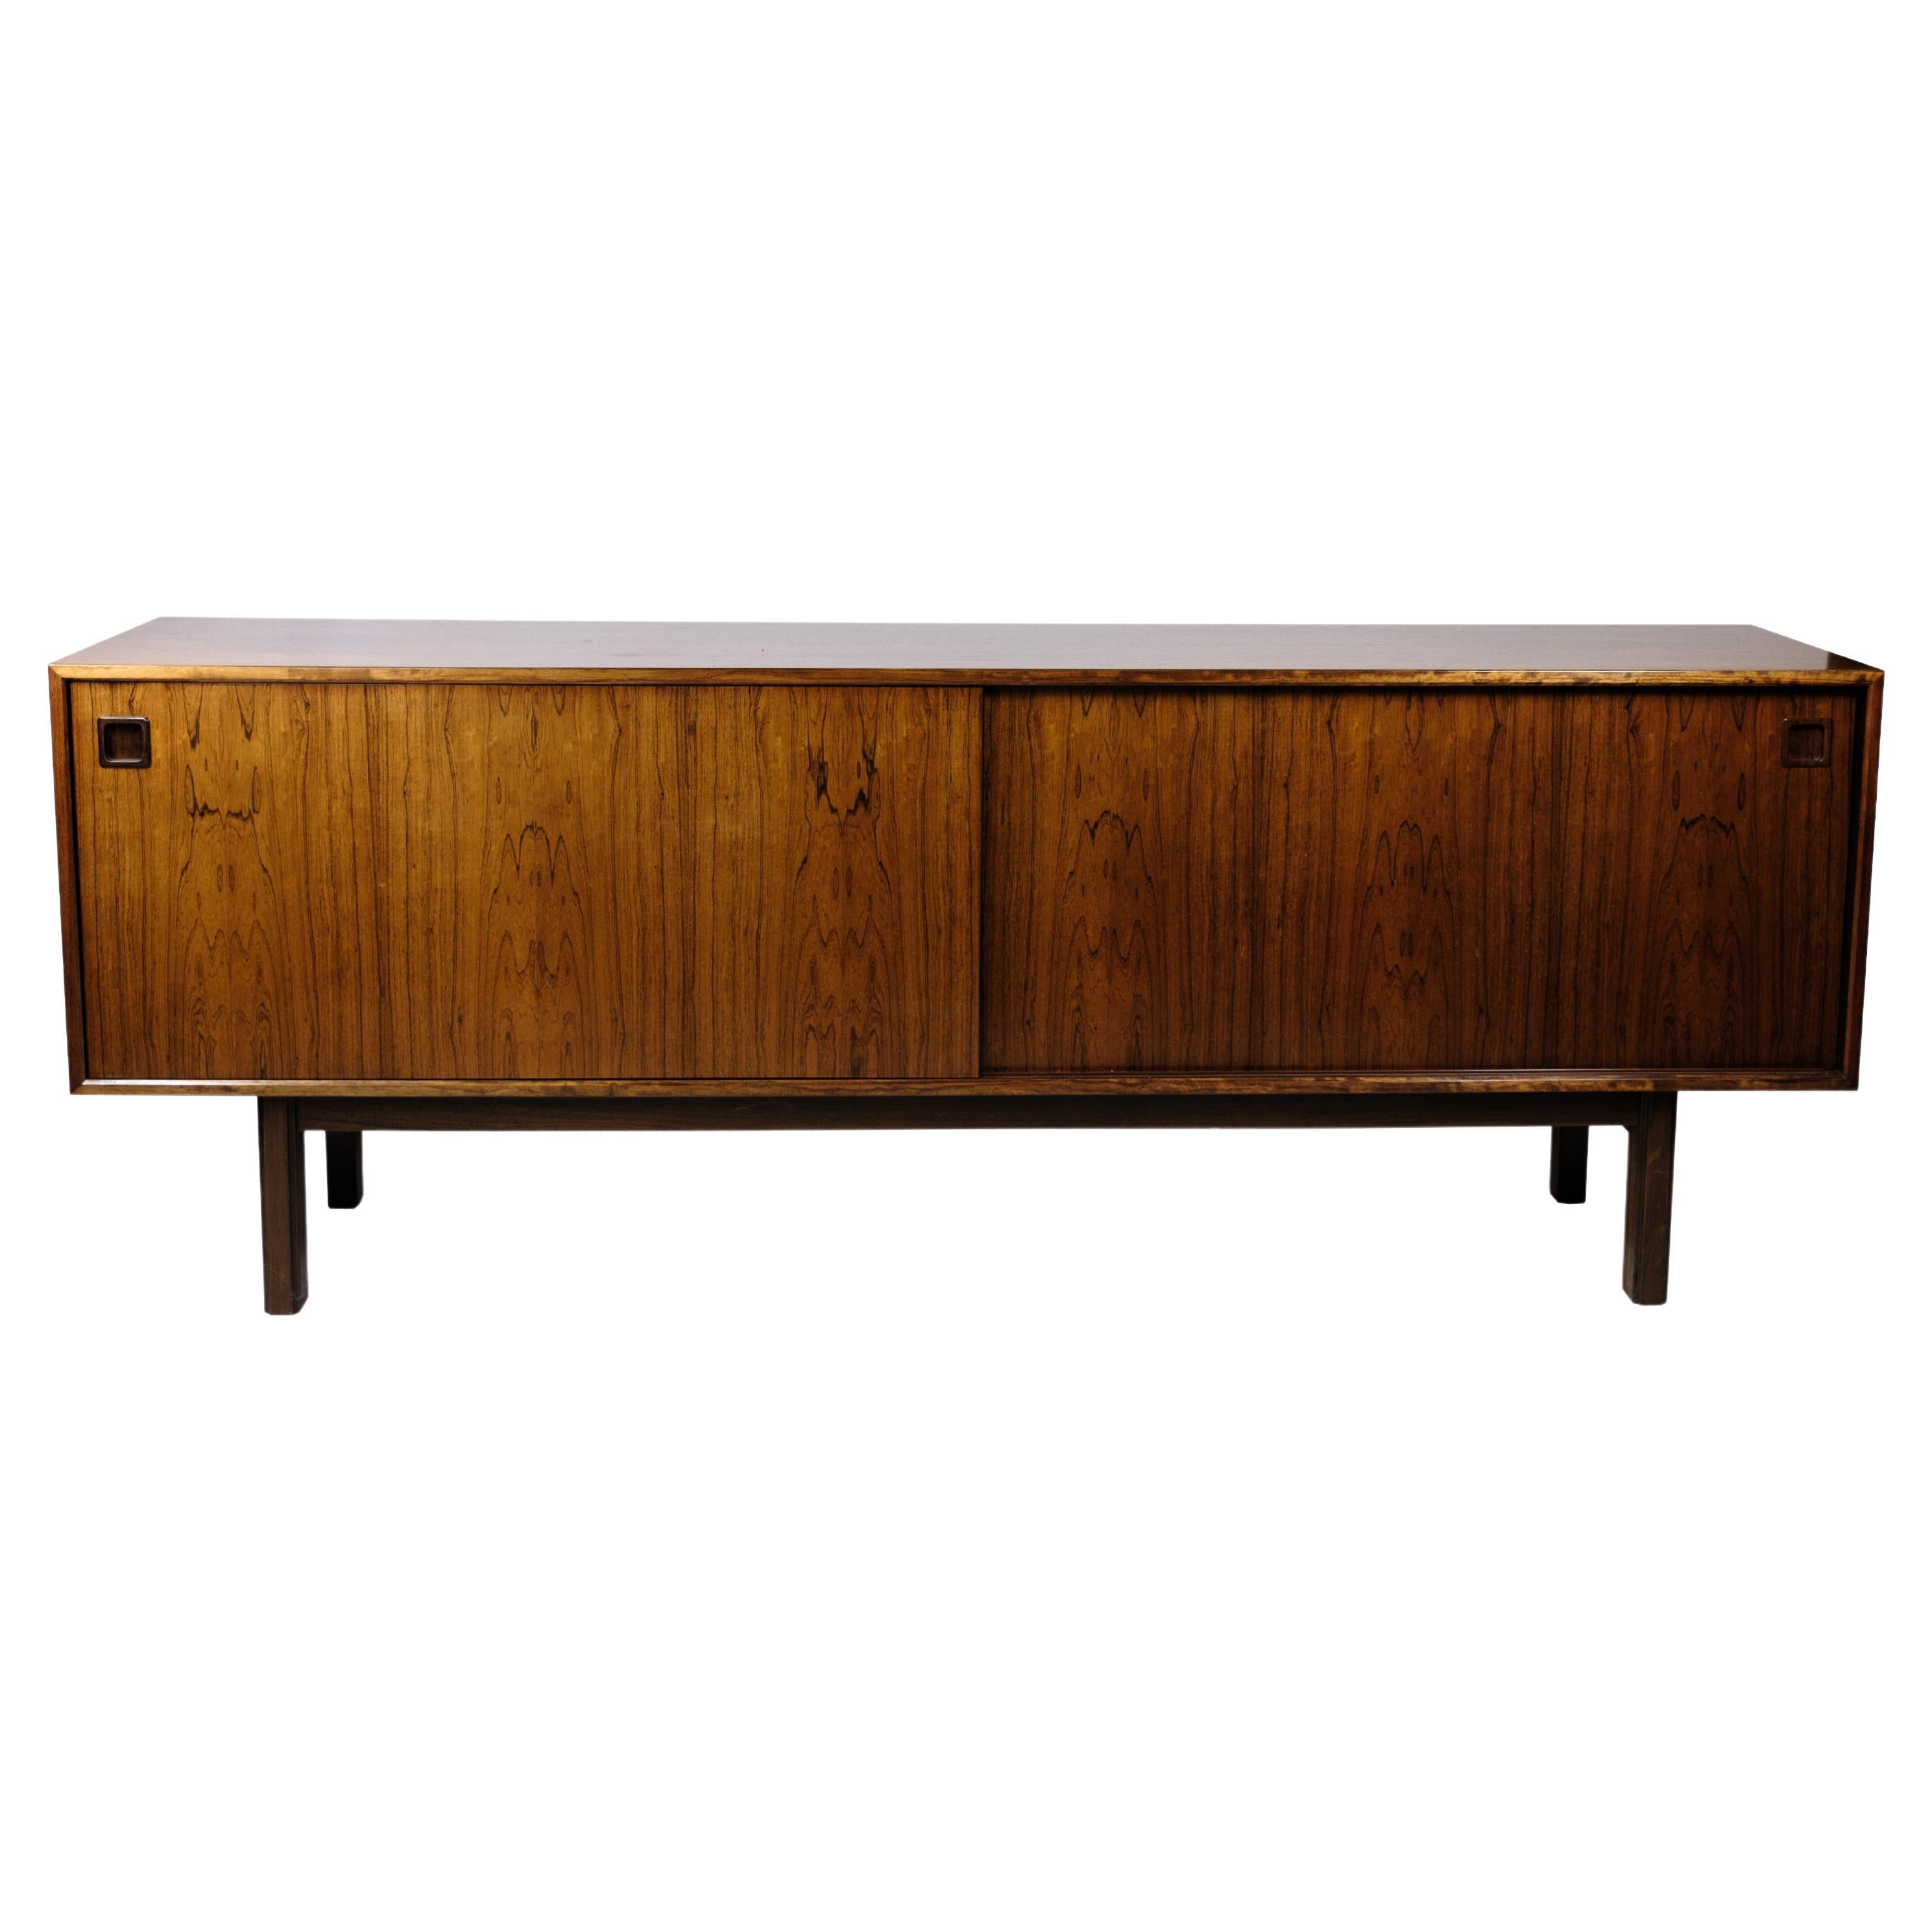 Low Sideboard By Omann Junior Made In Rosewood, Danish Design From 1960s